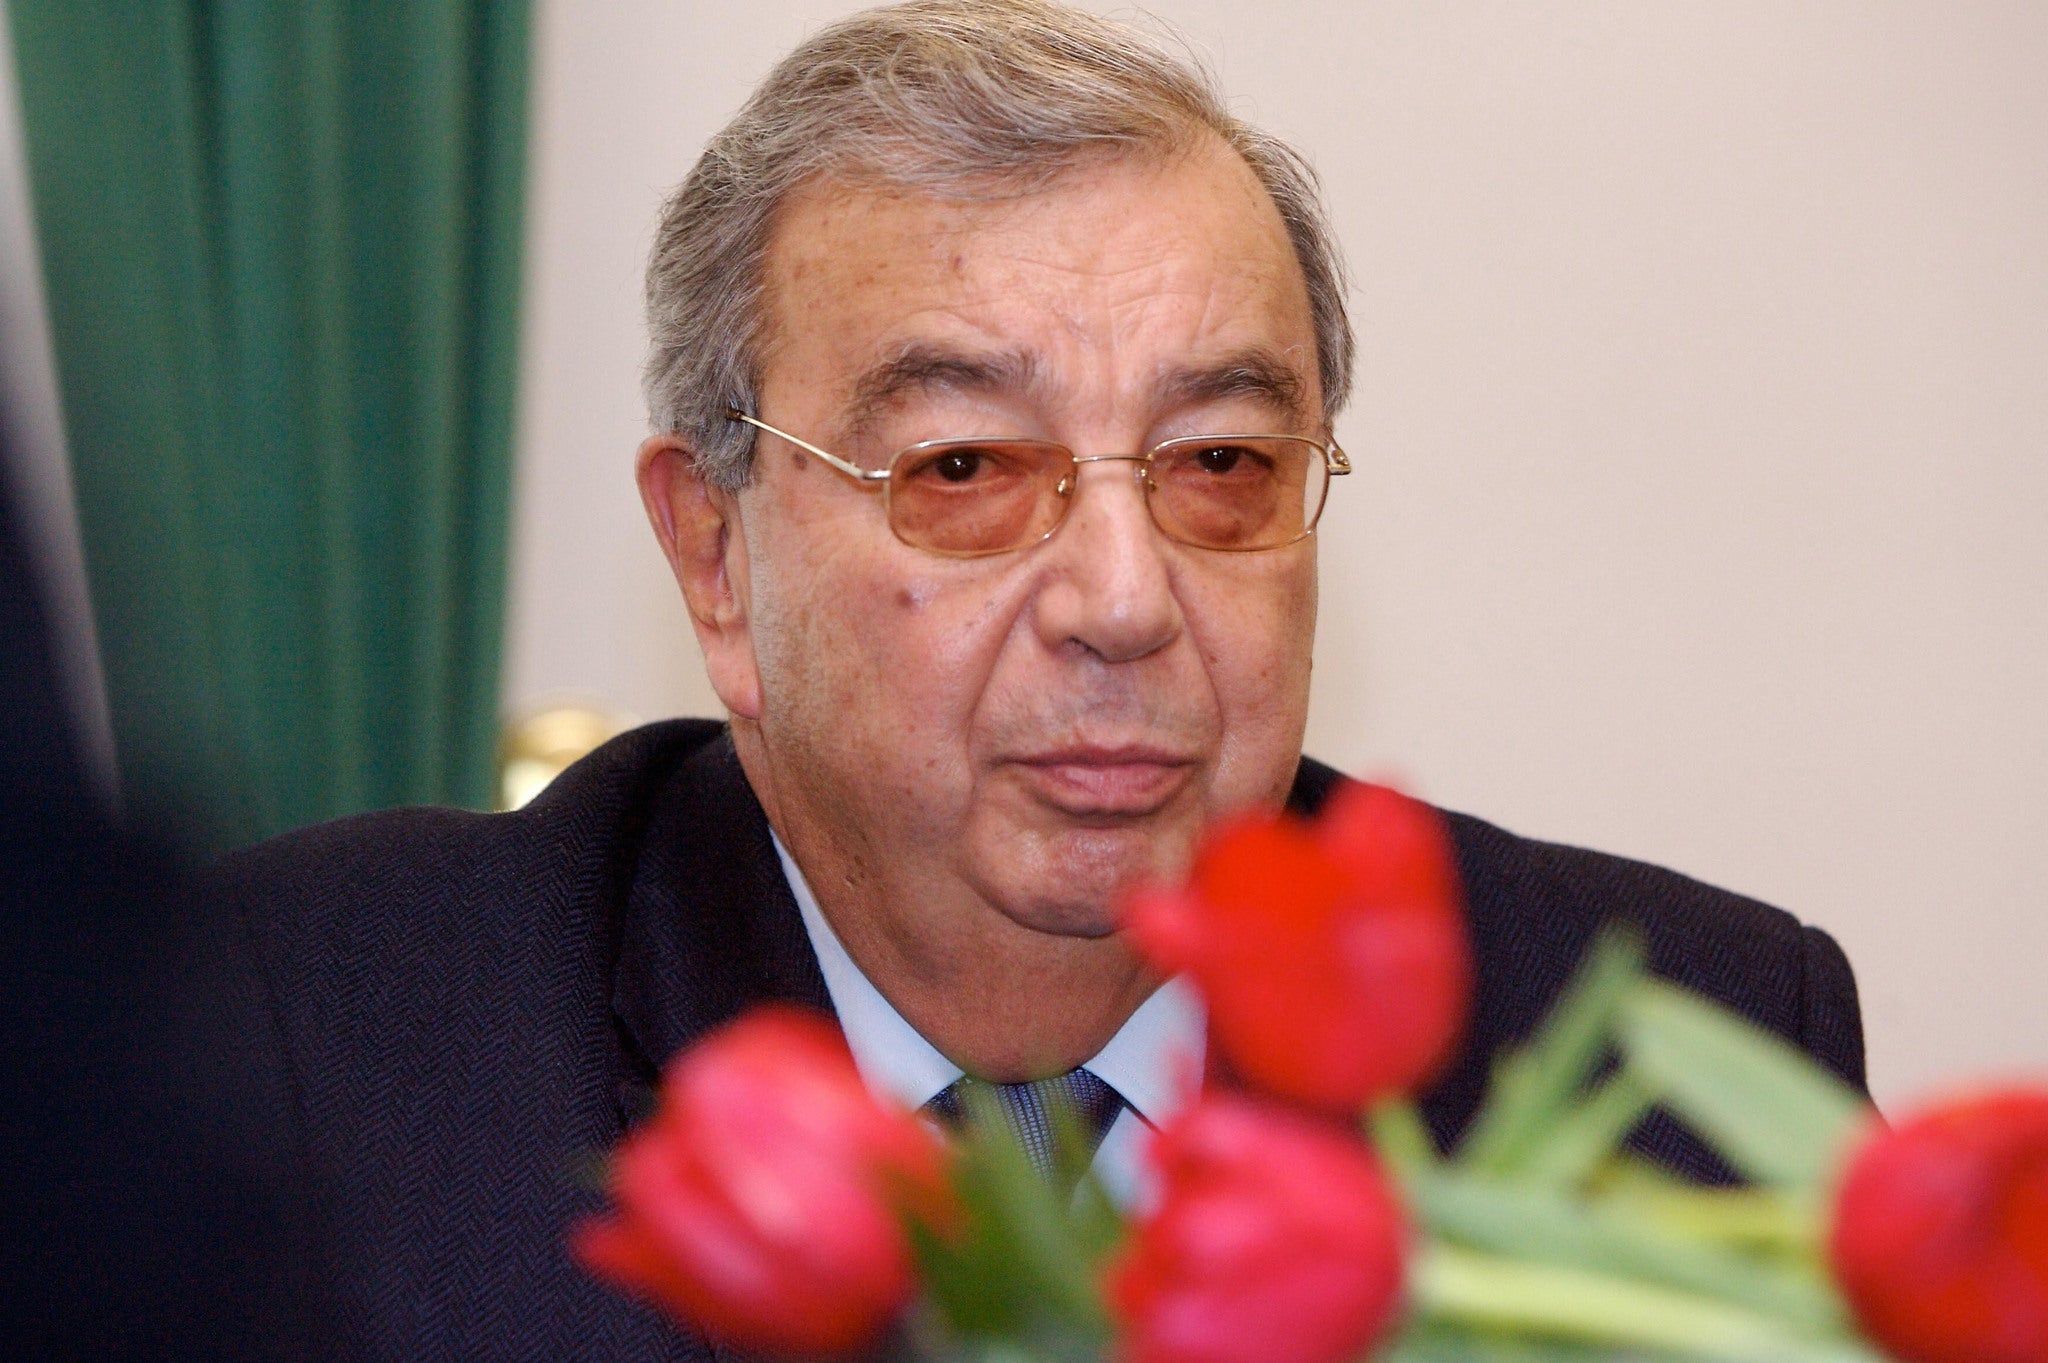 Yevgeny Primakov, pictured here in 2007, has died